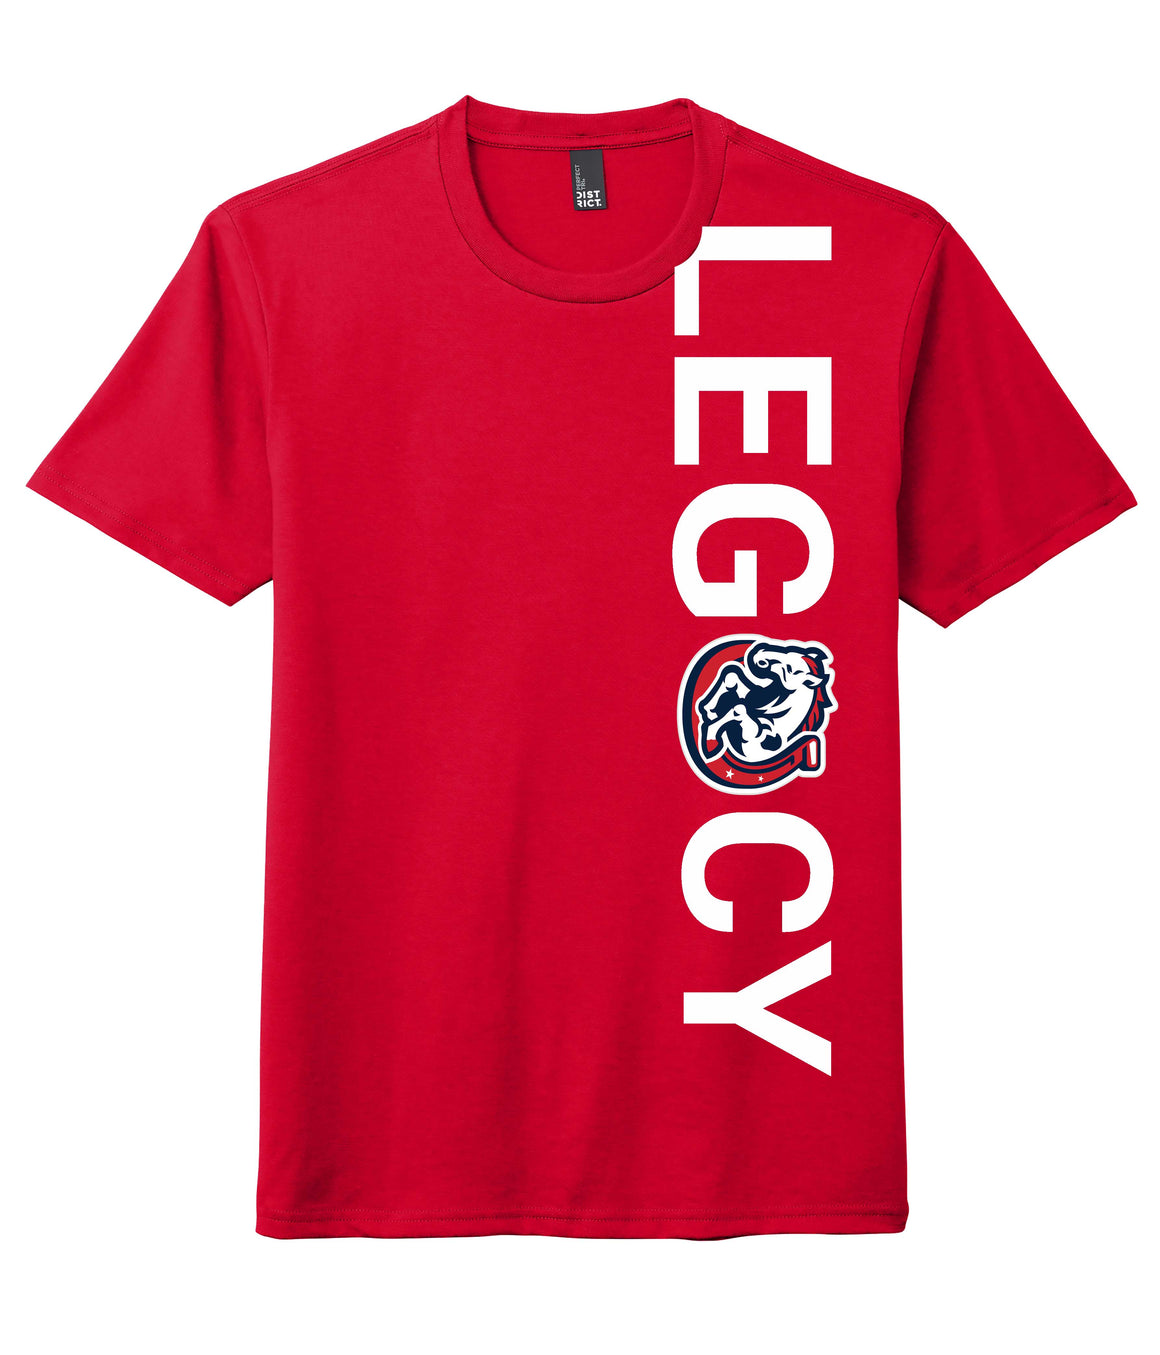 Legacy Traditional School West Surprise-Glitter Shirt